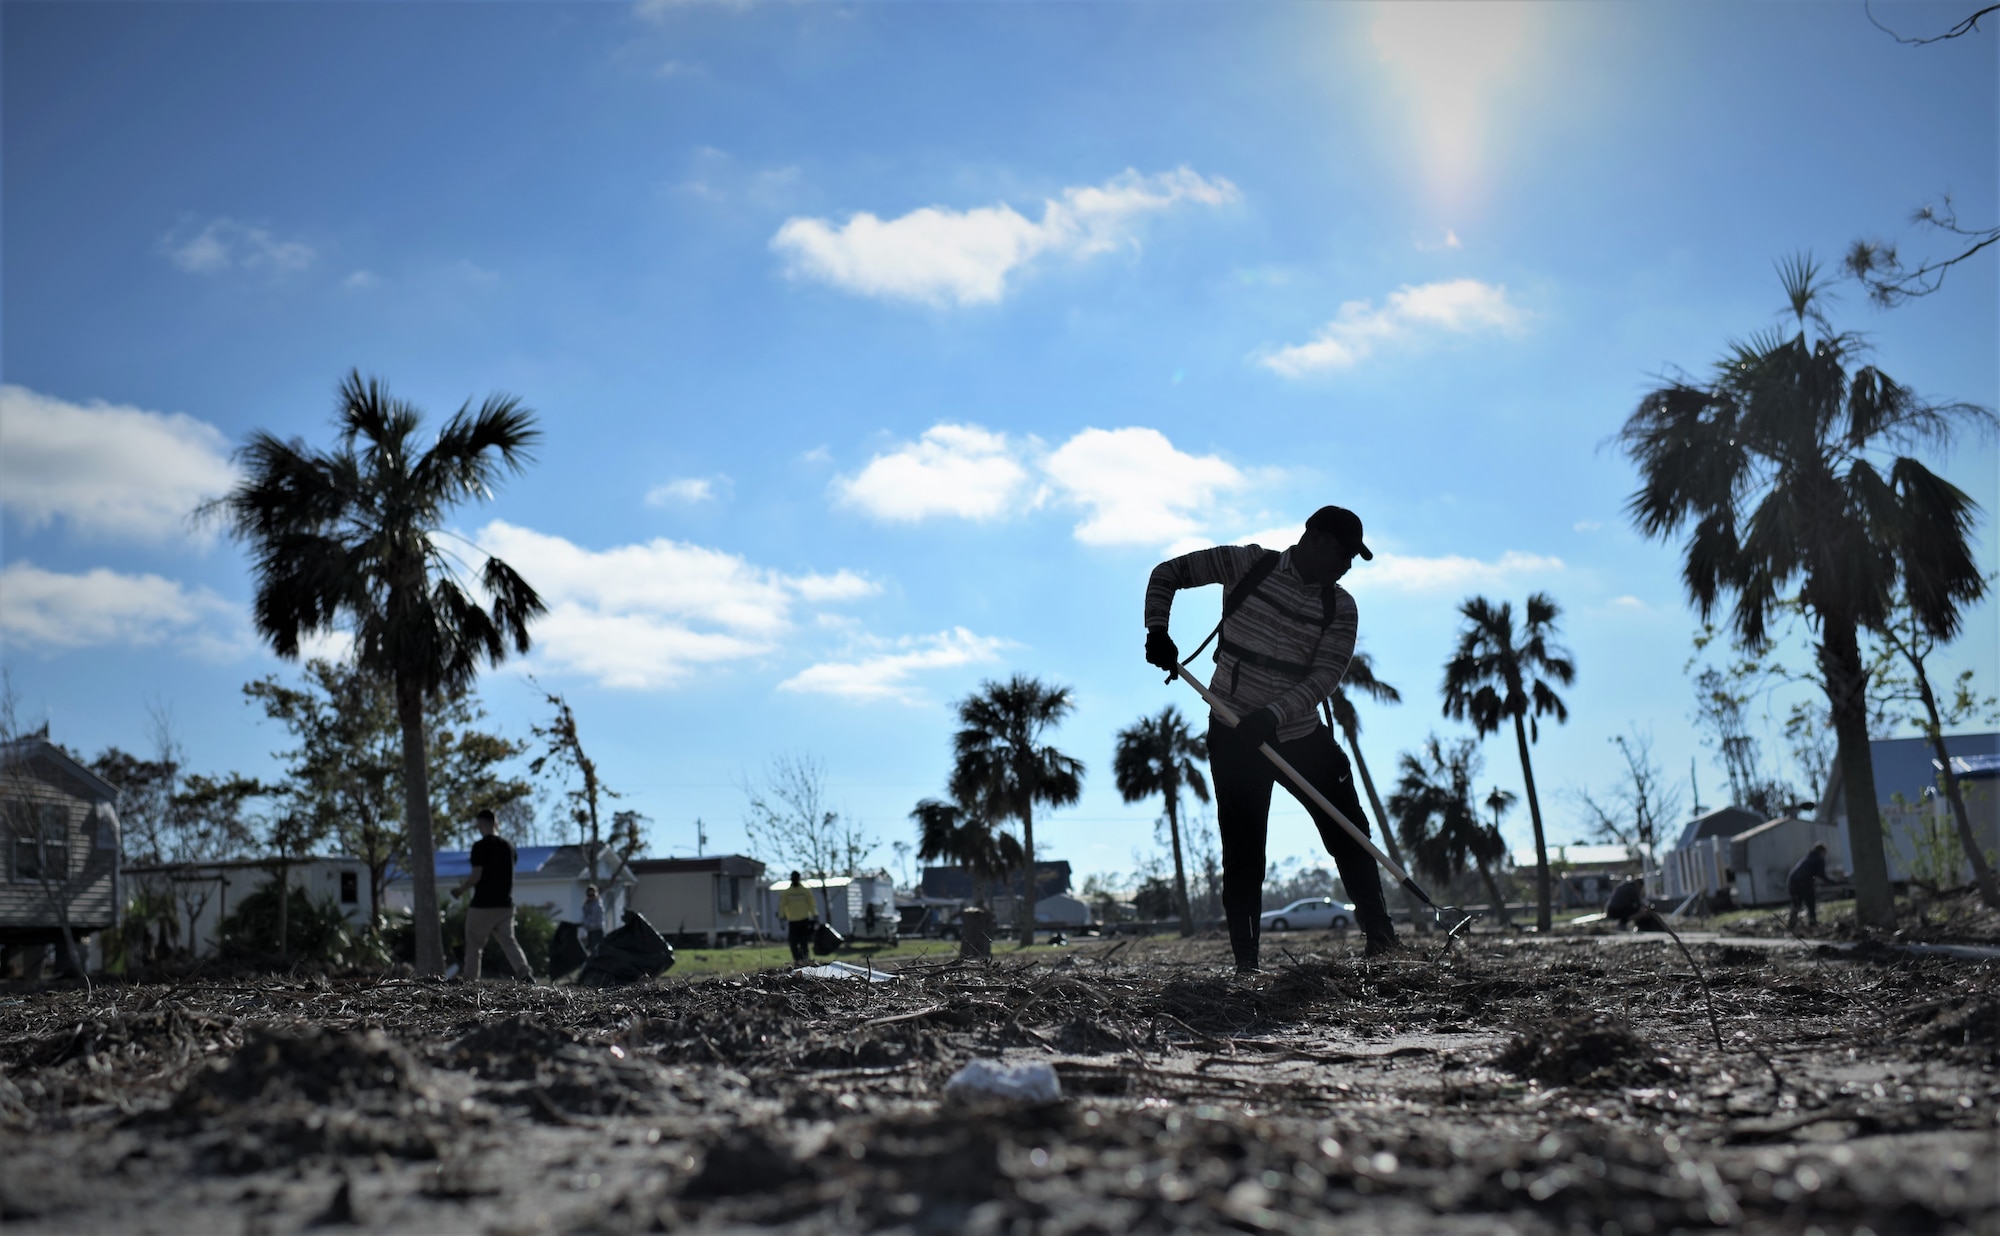 An Airman from Tyndall Air Force Base cleans debris from Under the Palms Park in Mexico Beach, Fla., Dec. 16, 2018. Thirty nine volunteers from Tyndall and Eglin Air Force Bases came together to help clean Mexico Beach, one of the communities hit the hardest by Hurricane Michael.  The volunteers were able to clean up more than 40 cubic yards of debris within four hours. (U.S. Air Force photo by Tech. Sgt. Sara Keller)